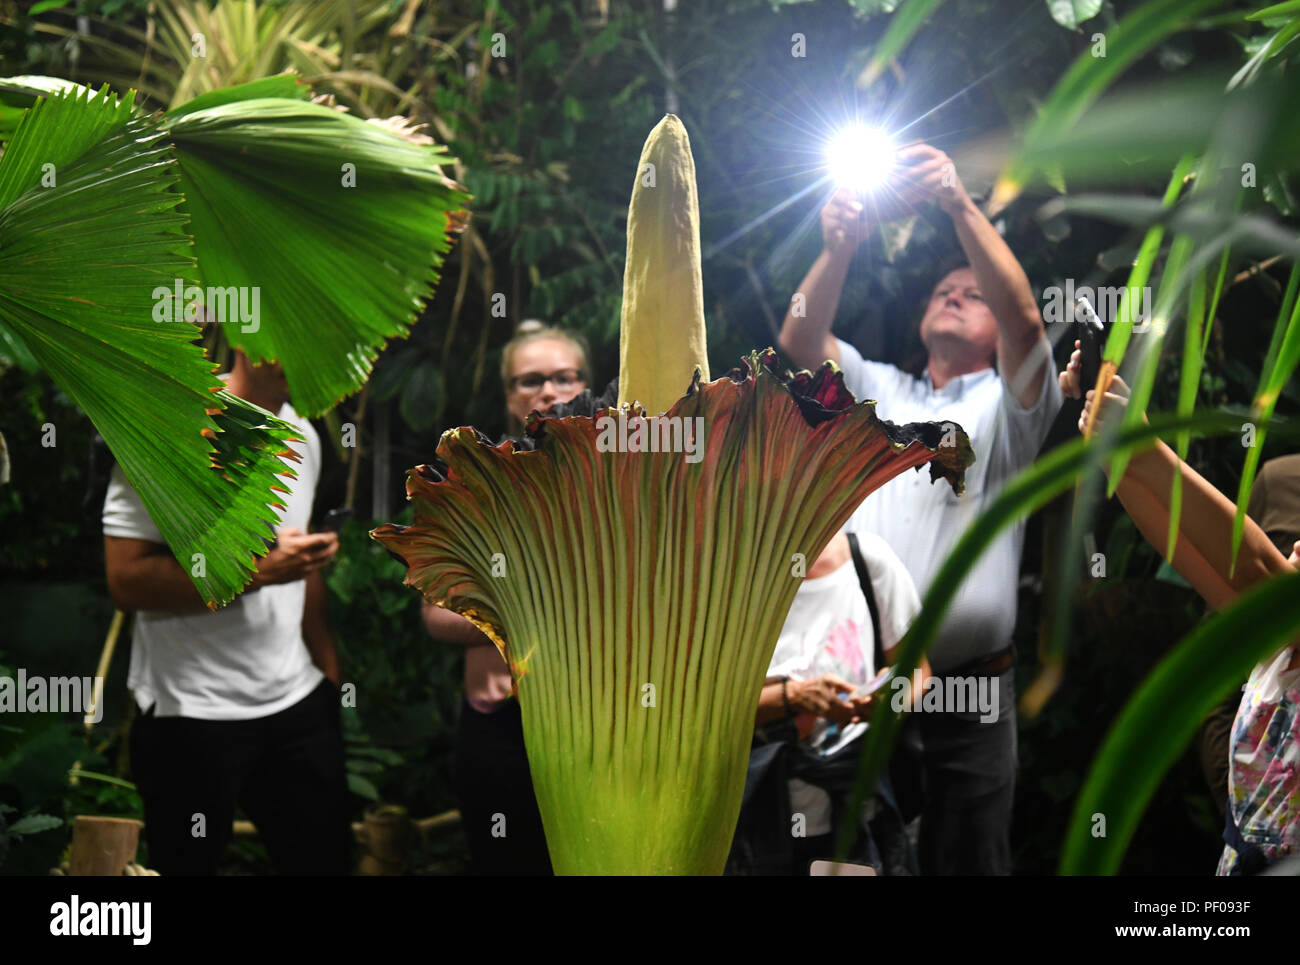 Dortmund, Germany. 17th Aug, 2018. Visitors photograph the titanium root (Amorphophallus titanum) in the Botanical Garden. This exotic plant blooms for only three days, during which it emits a distinctive smell. Credit: Ina Fassbender/dpa/Alamy Live News Stock Photo